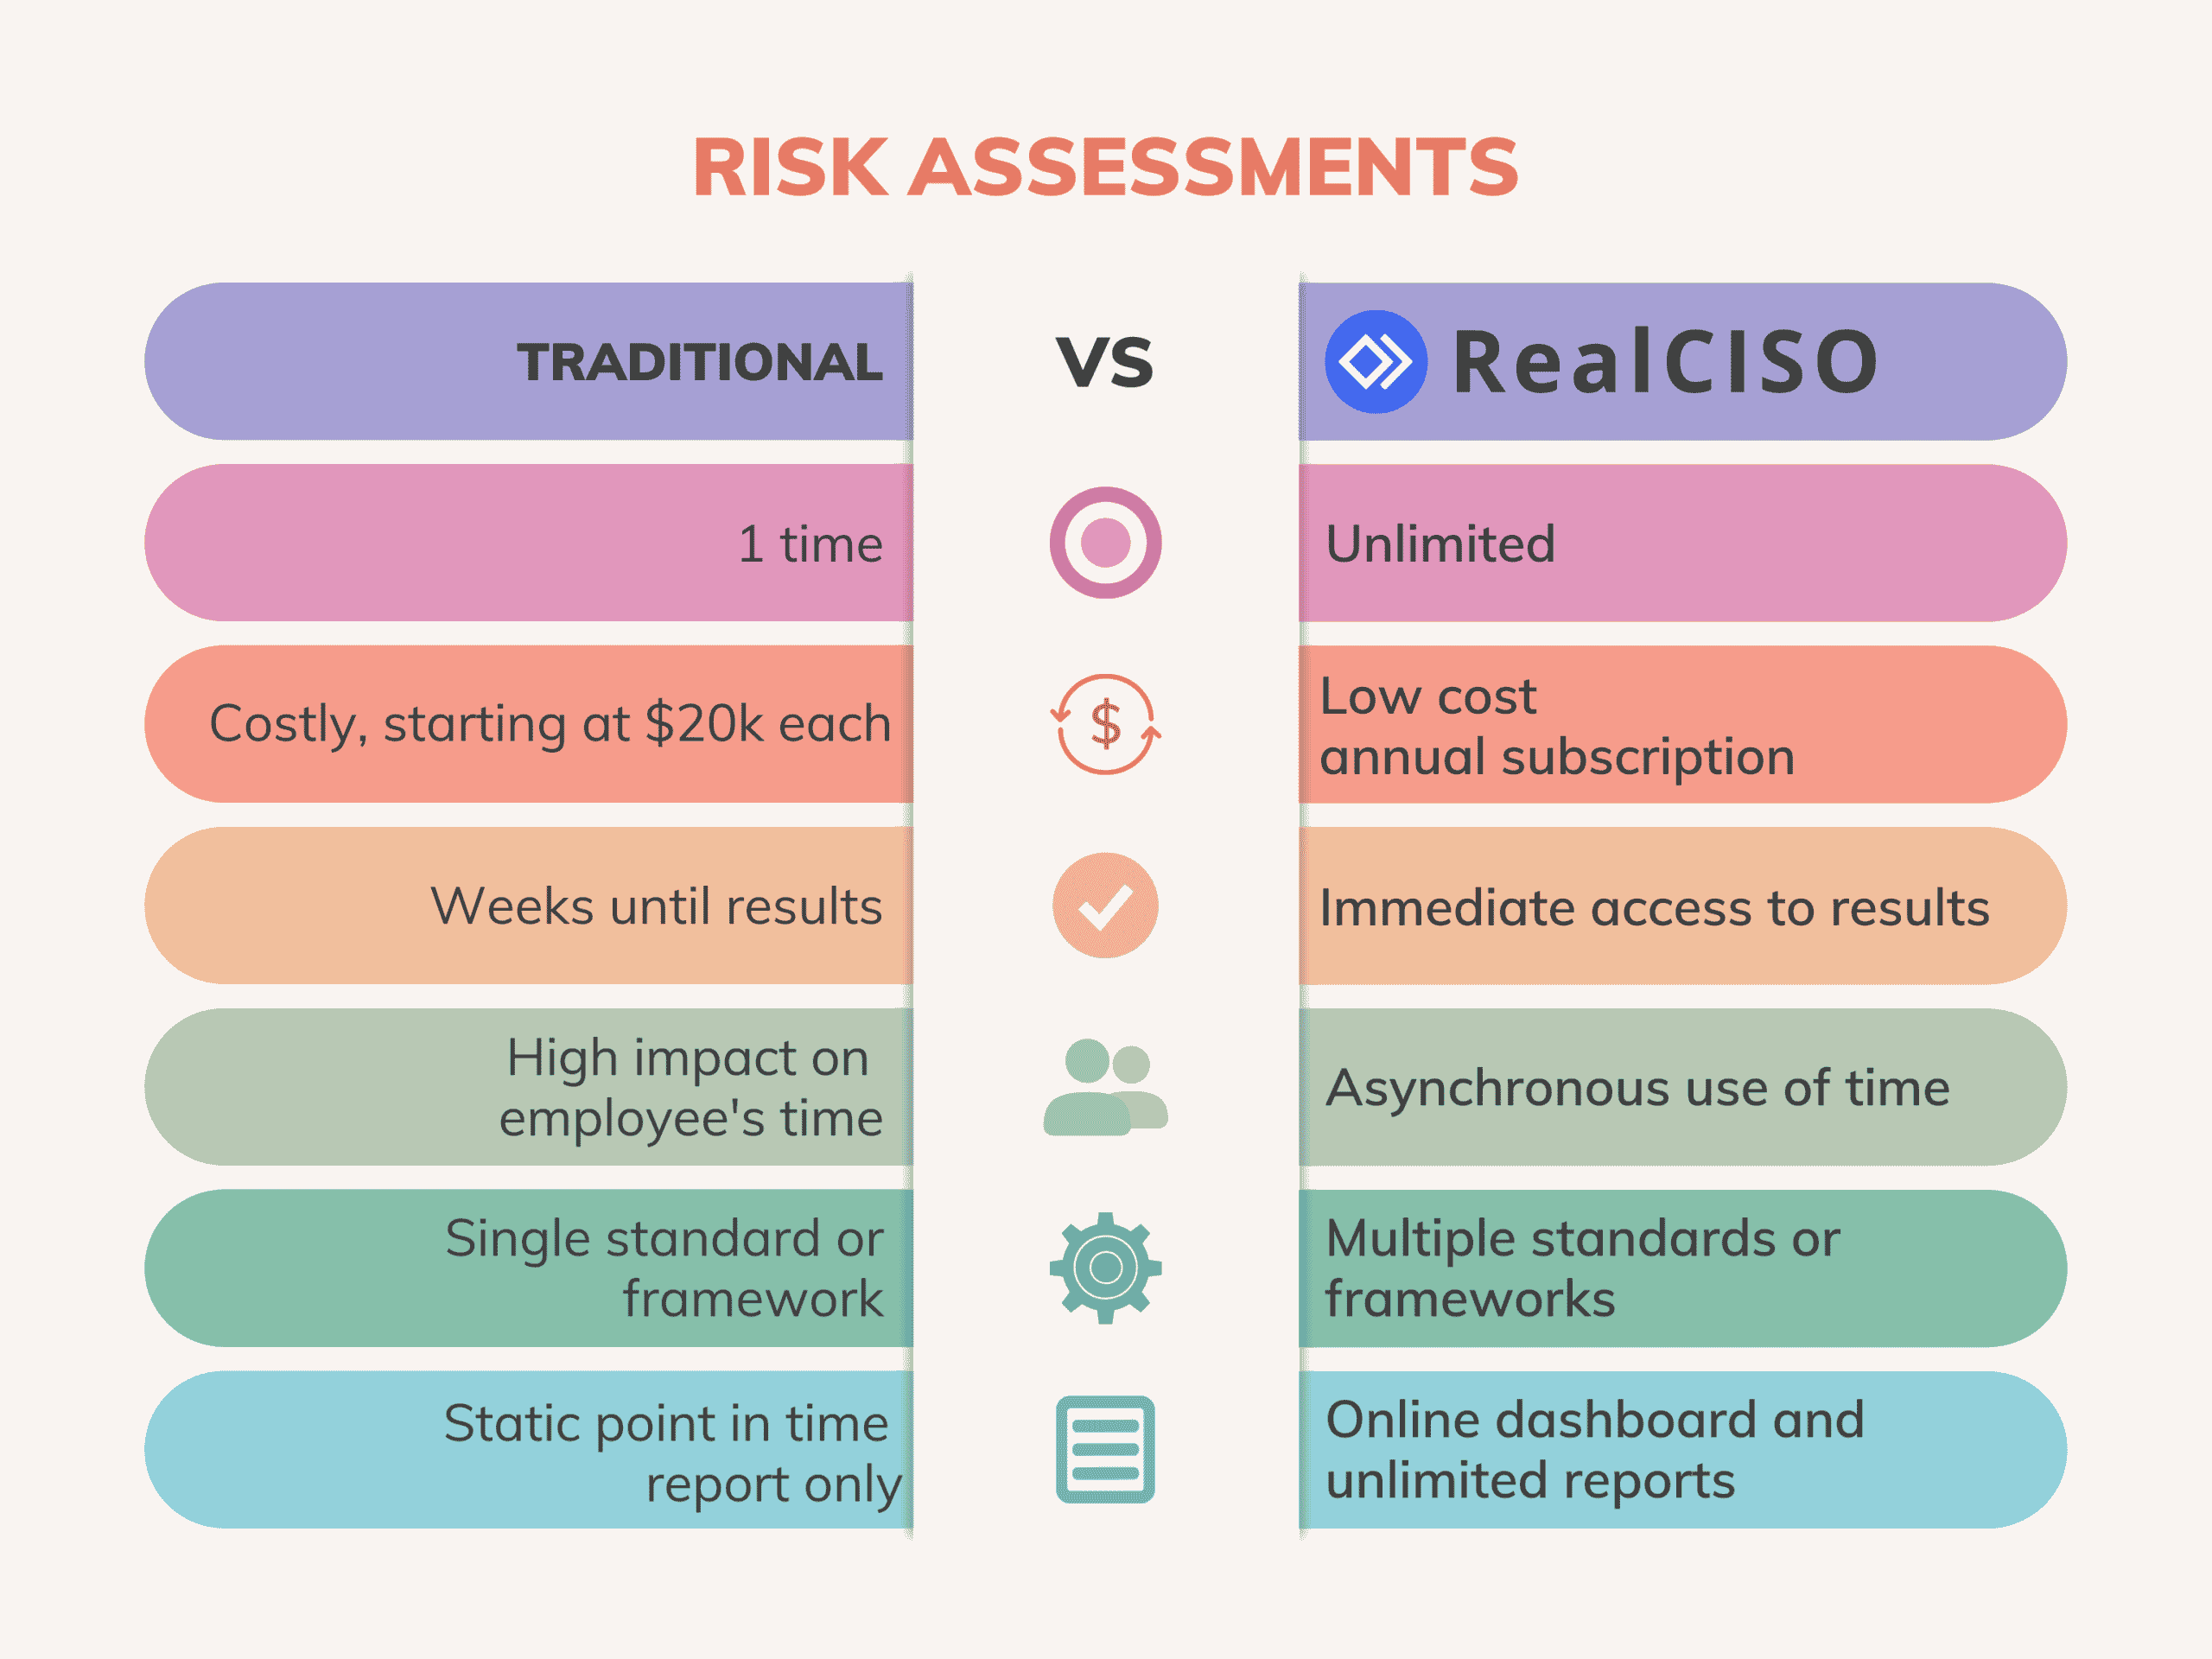 Risk Assessments with RealCISO